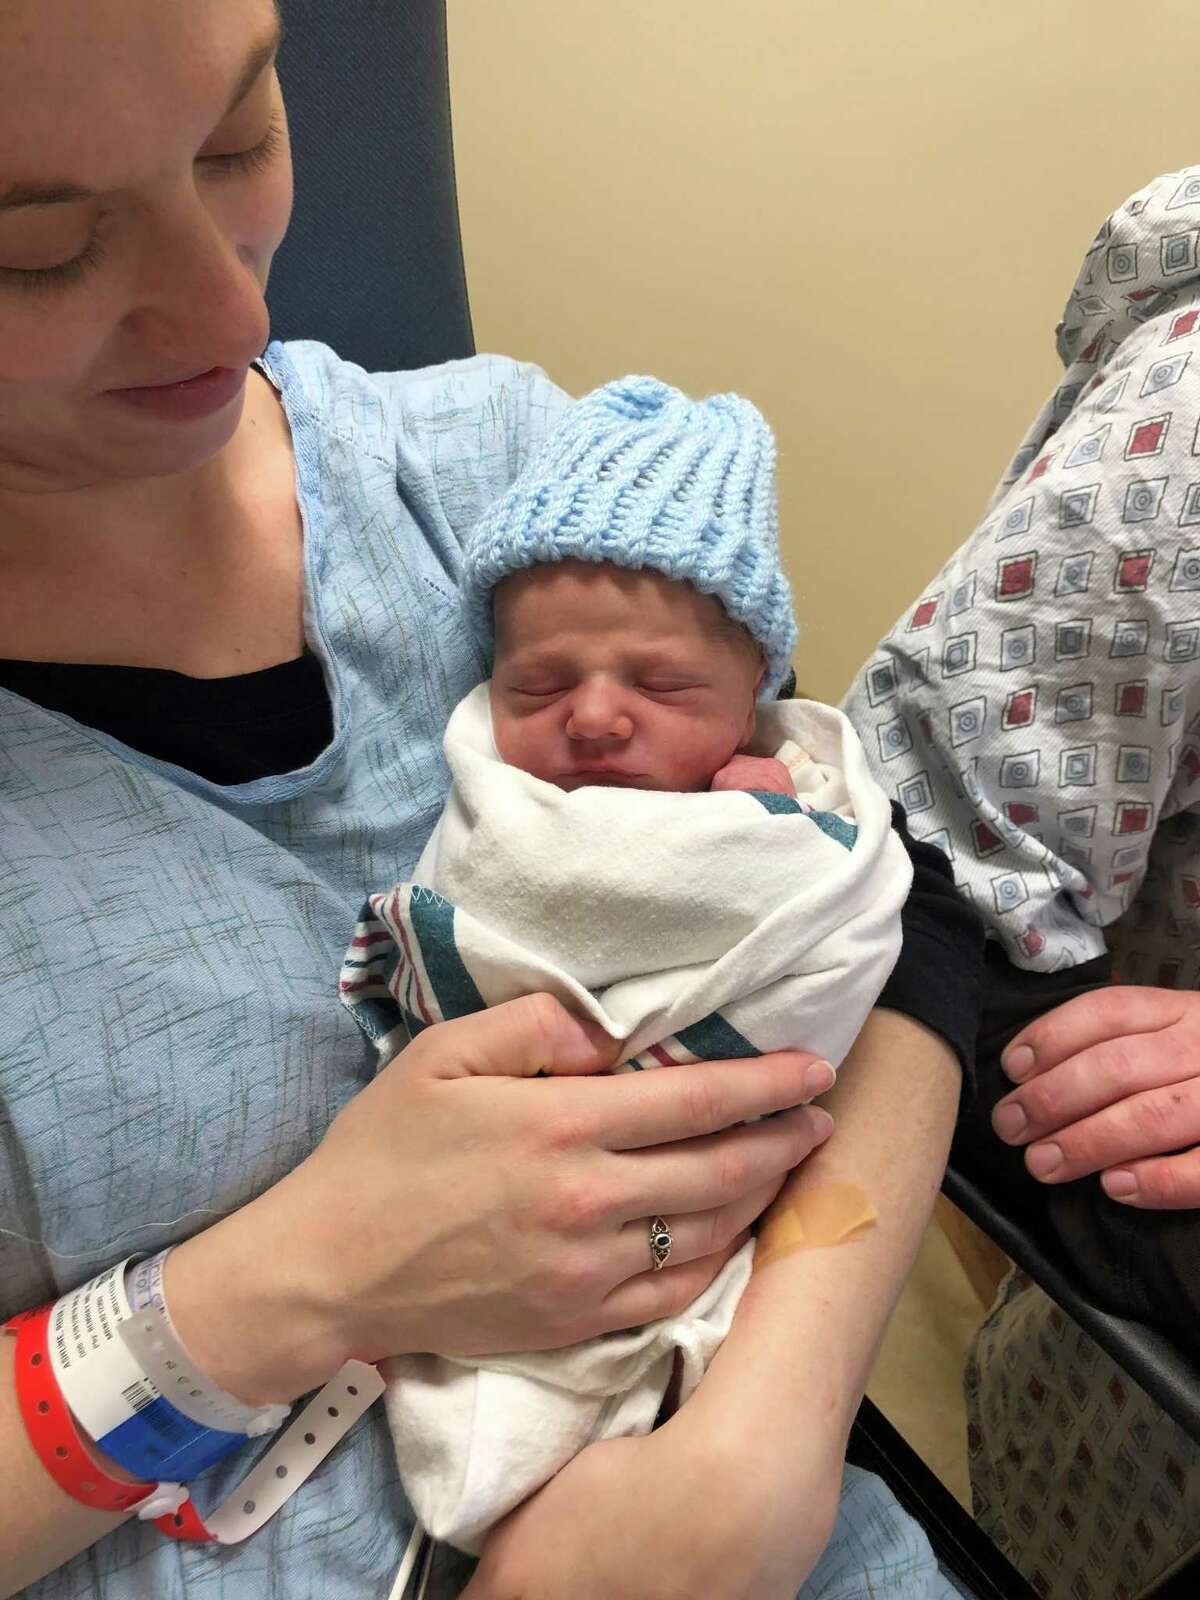 Reiva Ashline of Hampton sits with her newborn son, Colton Donald Ballard. Born at 1:40 a.m. Tuesday, Jan. 1, 2019, at Glens Falls Hospital, the newborn was the first child born in the Capital Region this year.